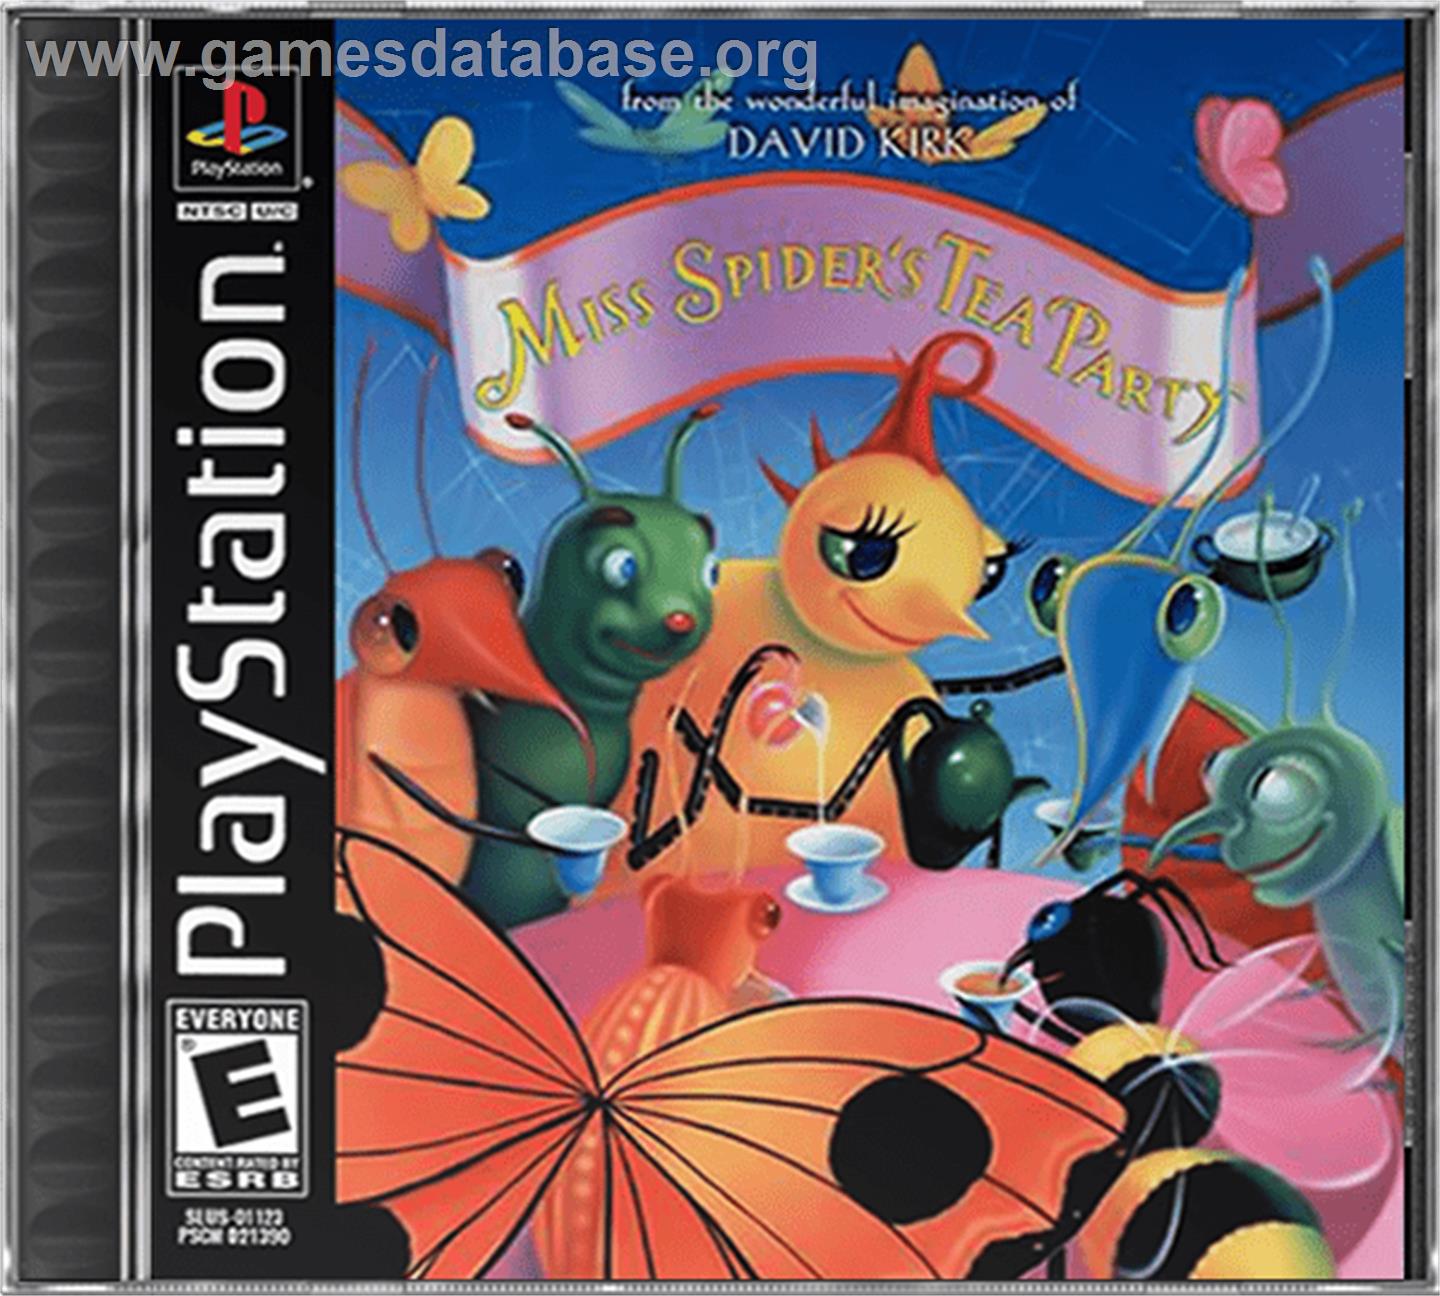 Miss Spider's Tea Party - Sony Playstation - Artwork - Box